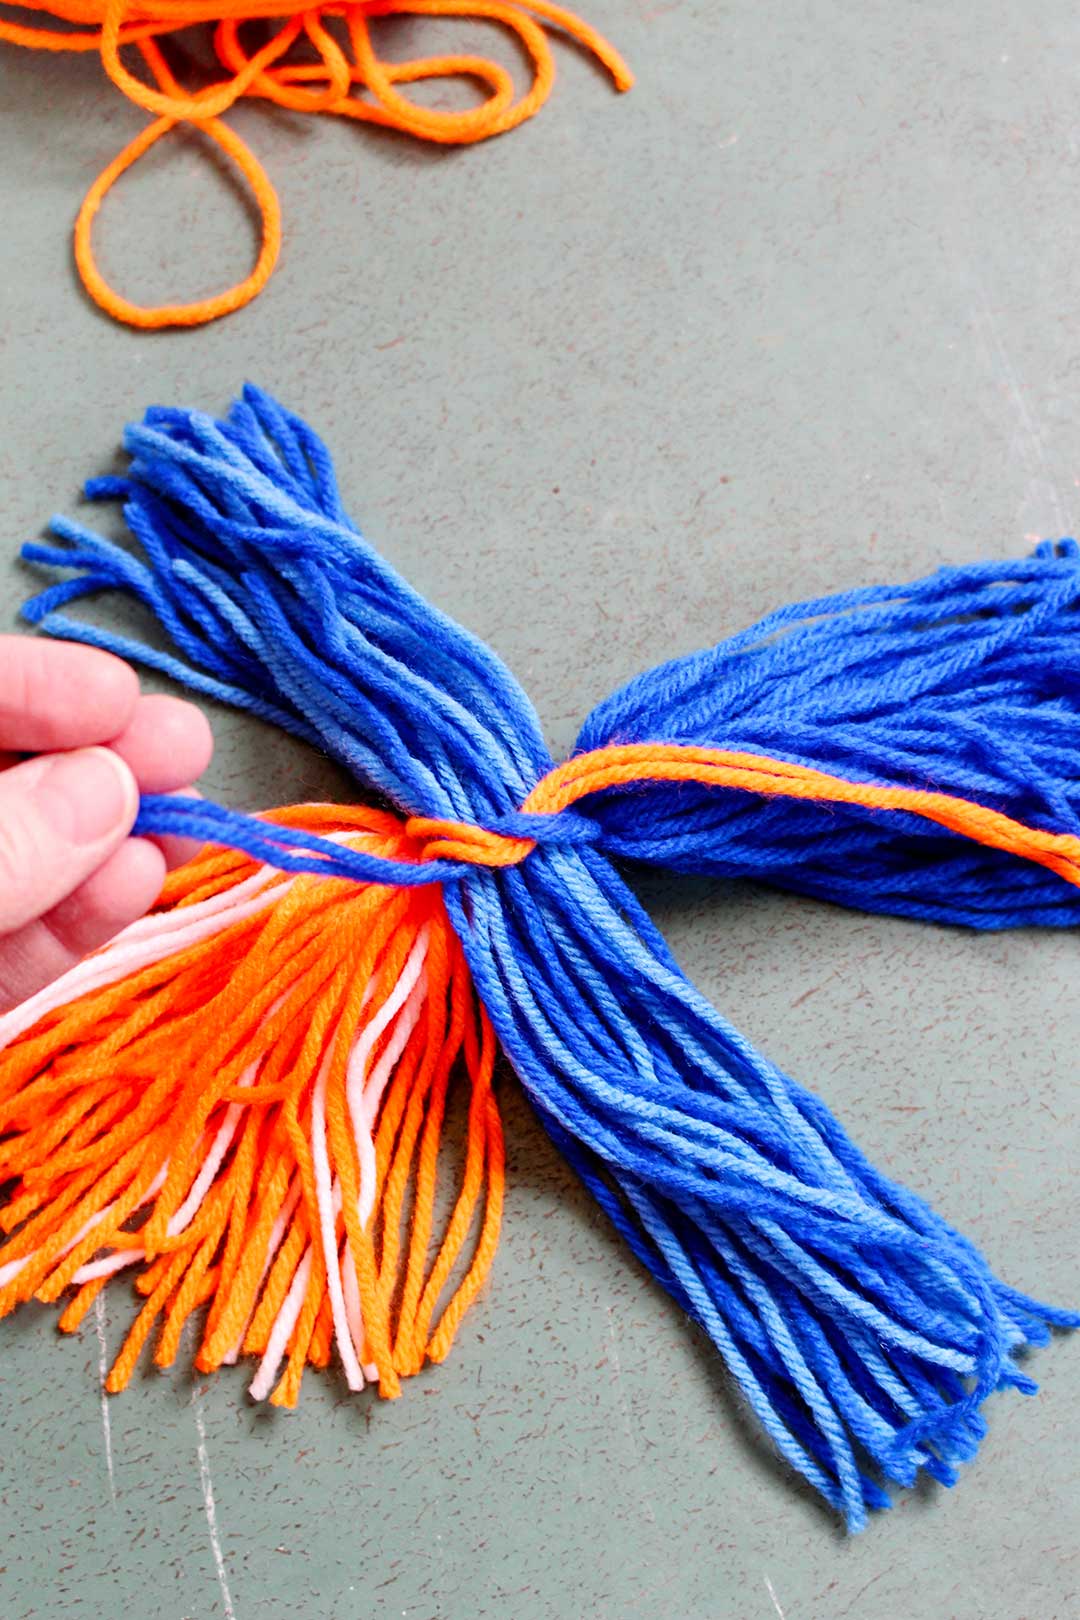 Blue and orange yarn tied in a bunch.